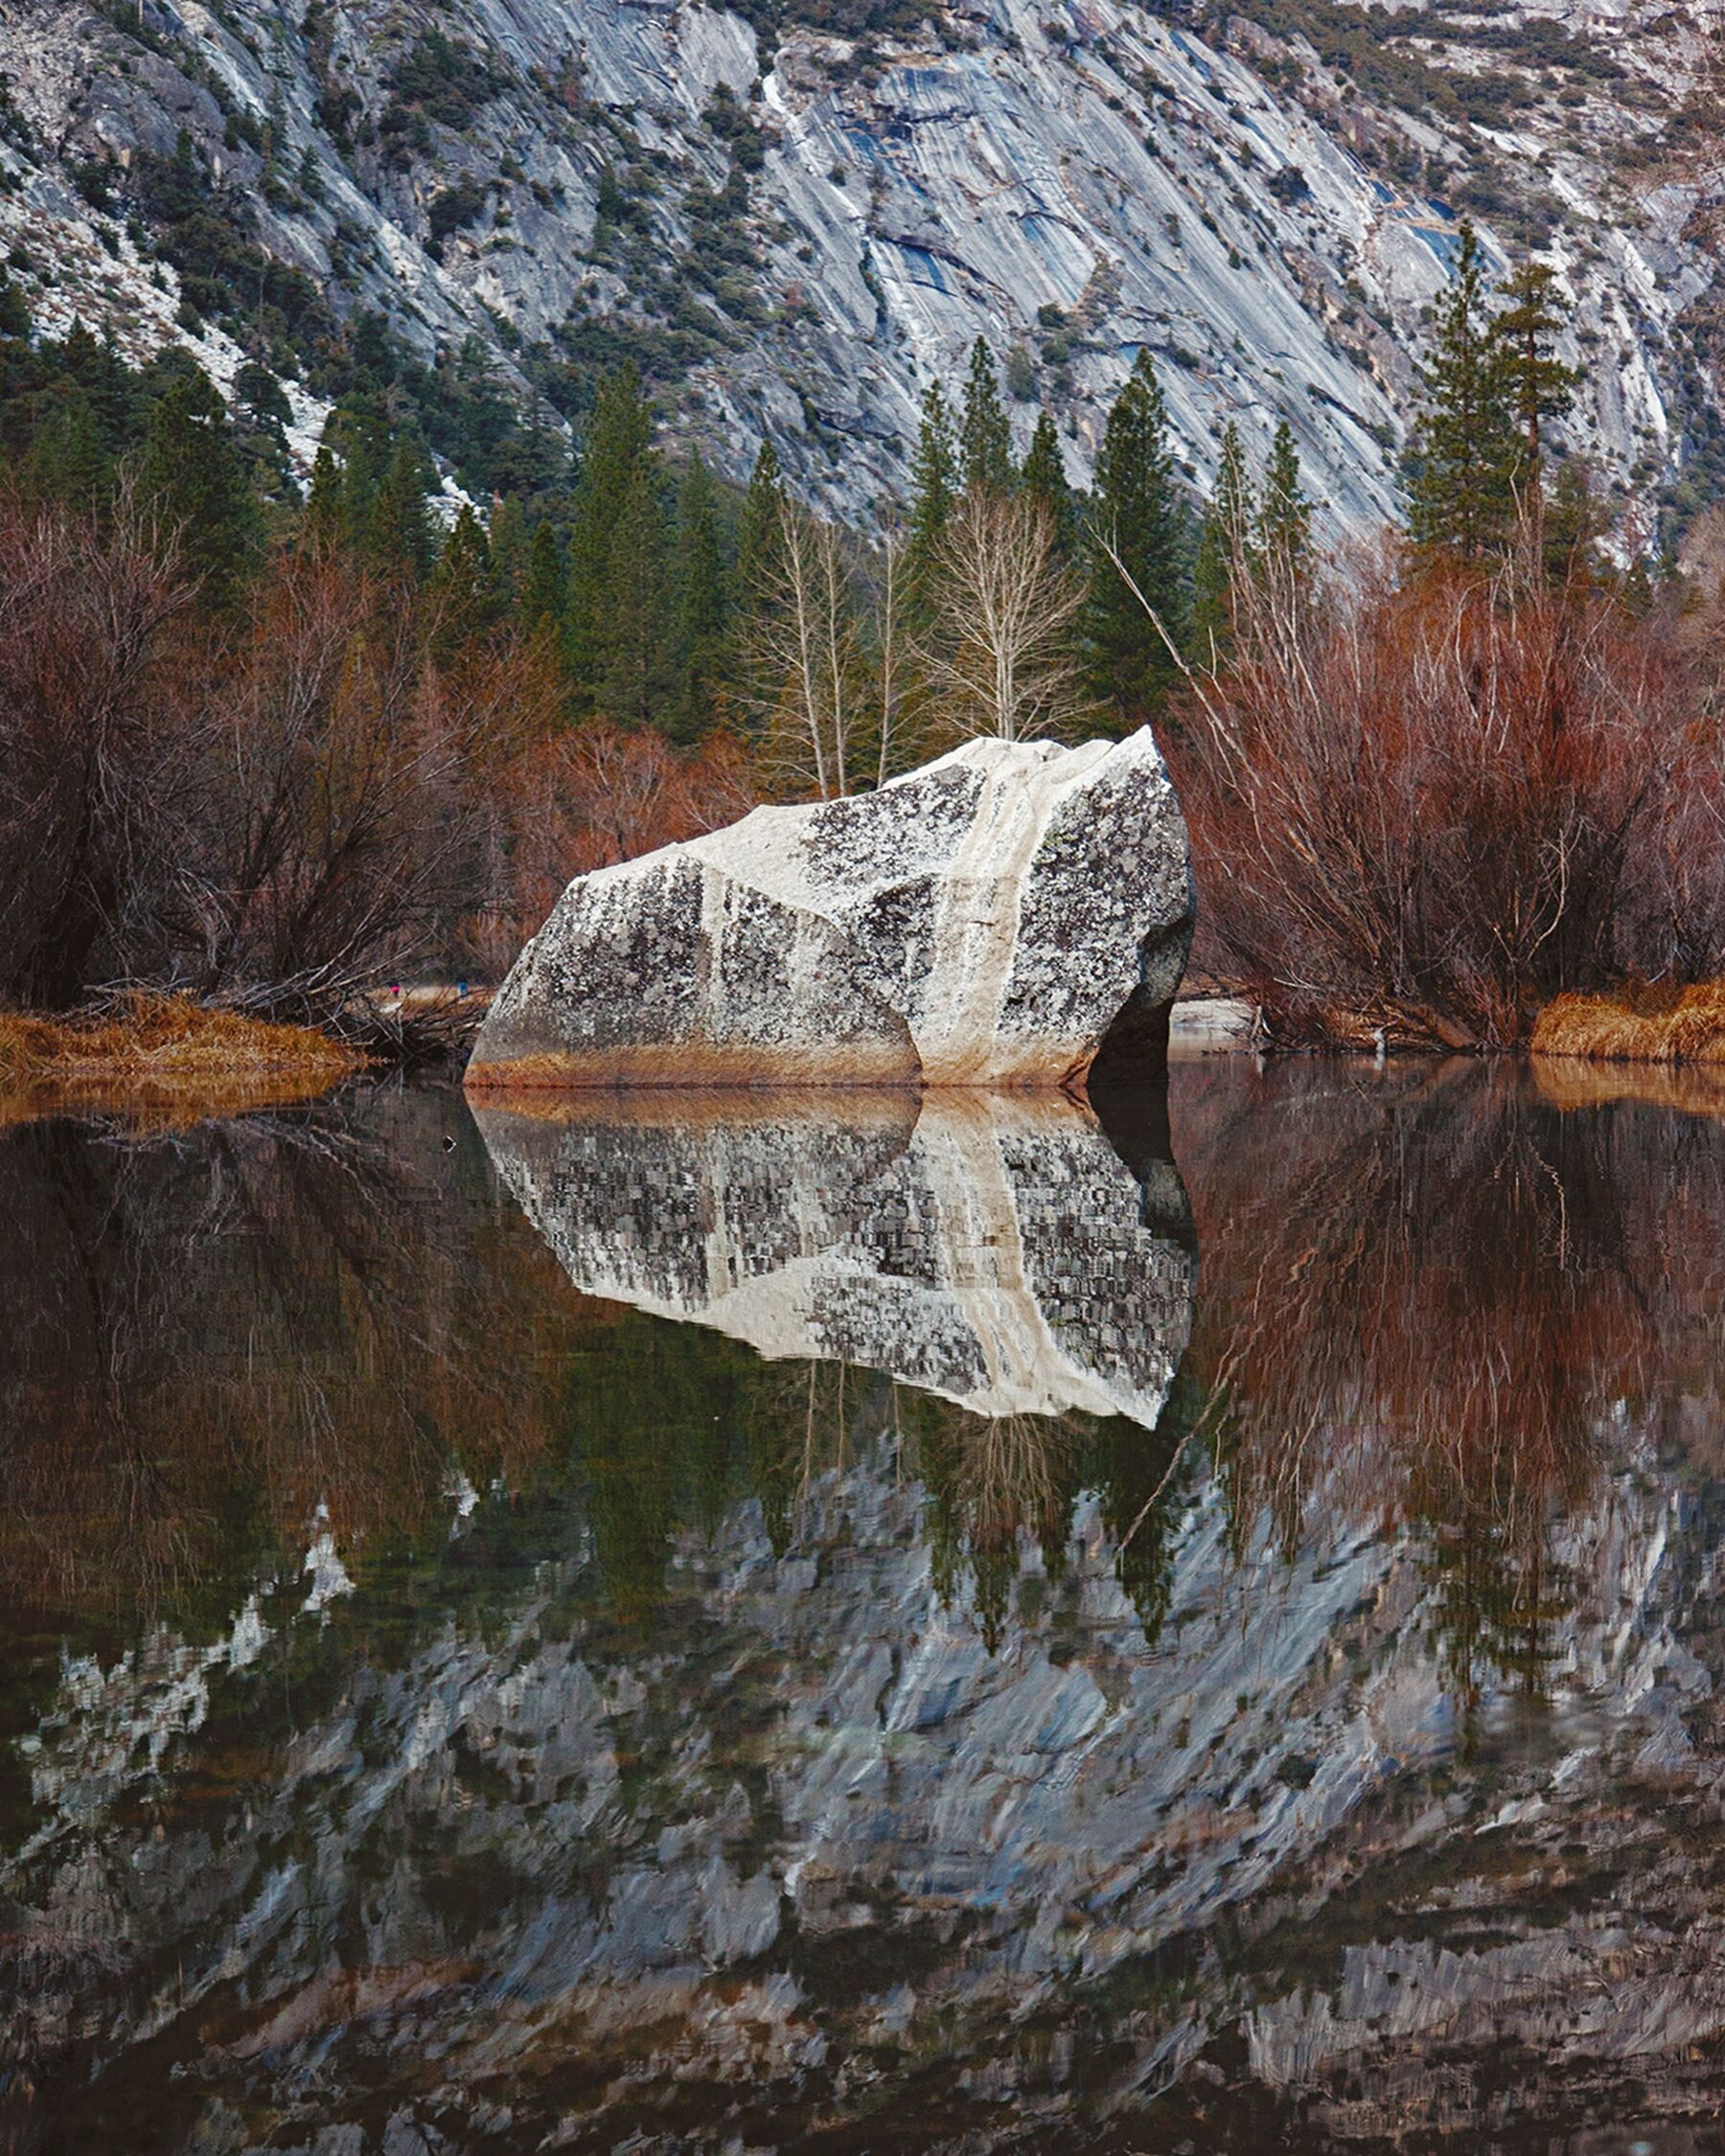 A boulder reflected in the glassy waters of Mirror Lake in Yosemite National Park, California